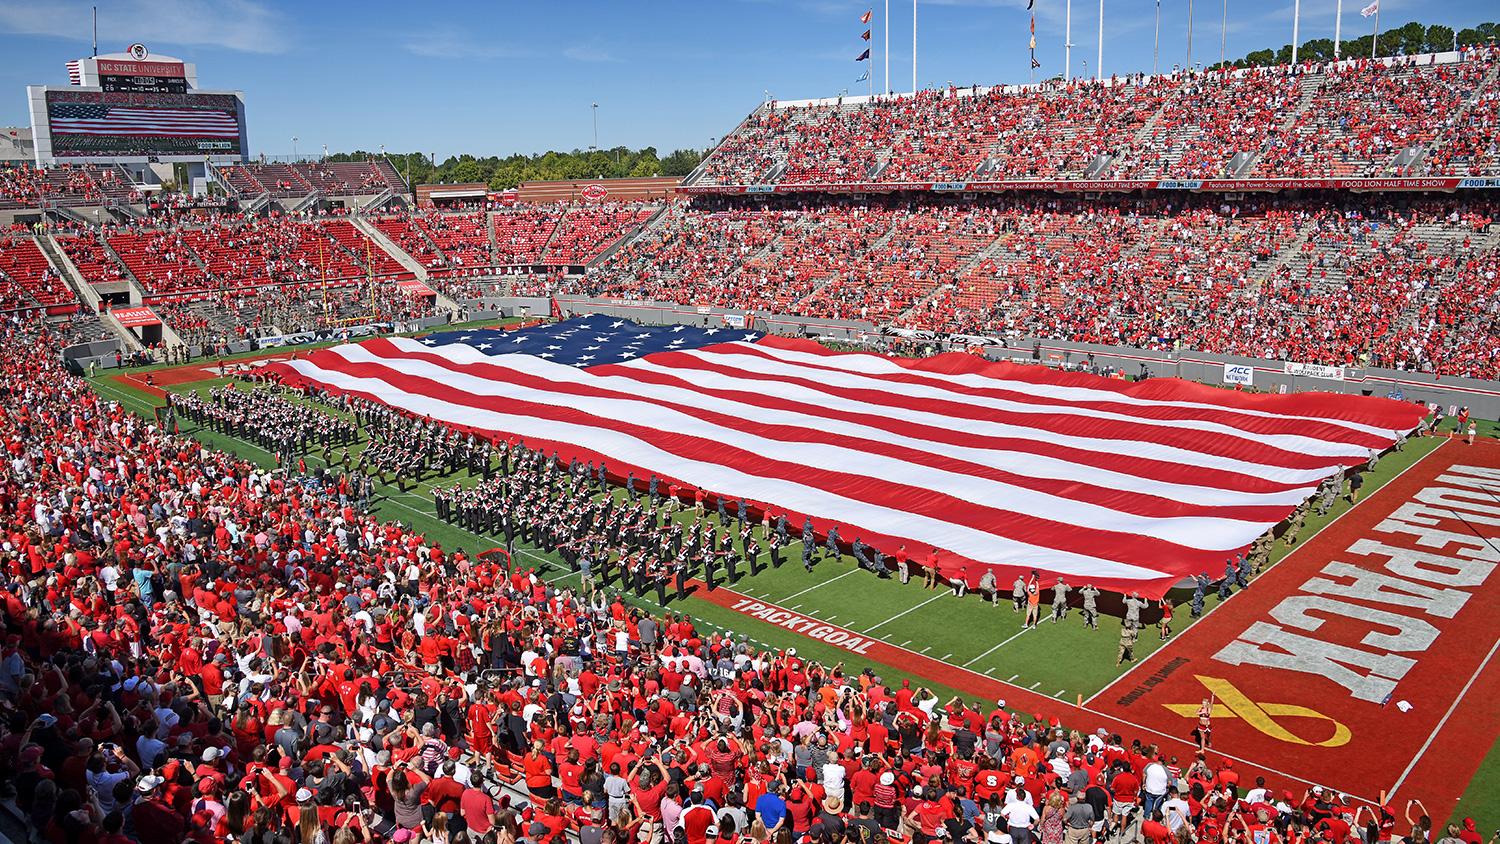 The American flag covers the field during a presentation at half time during the 2017 Military Appreciation Day at Carter-Finley Stadium.